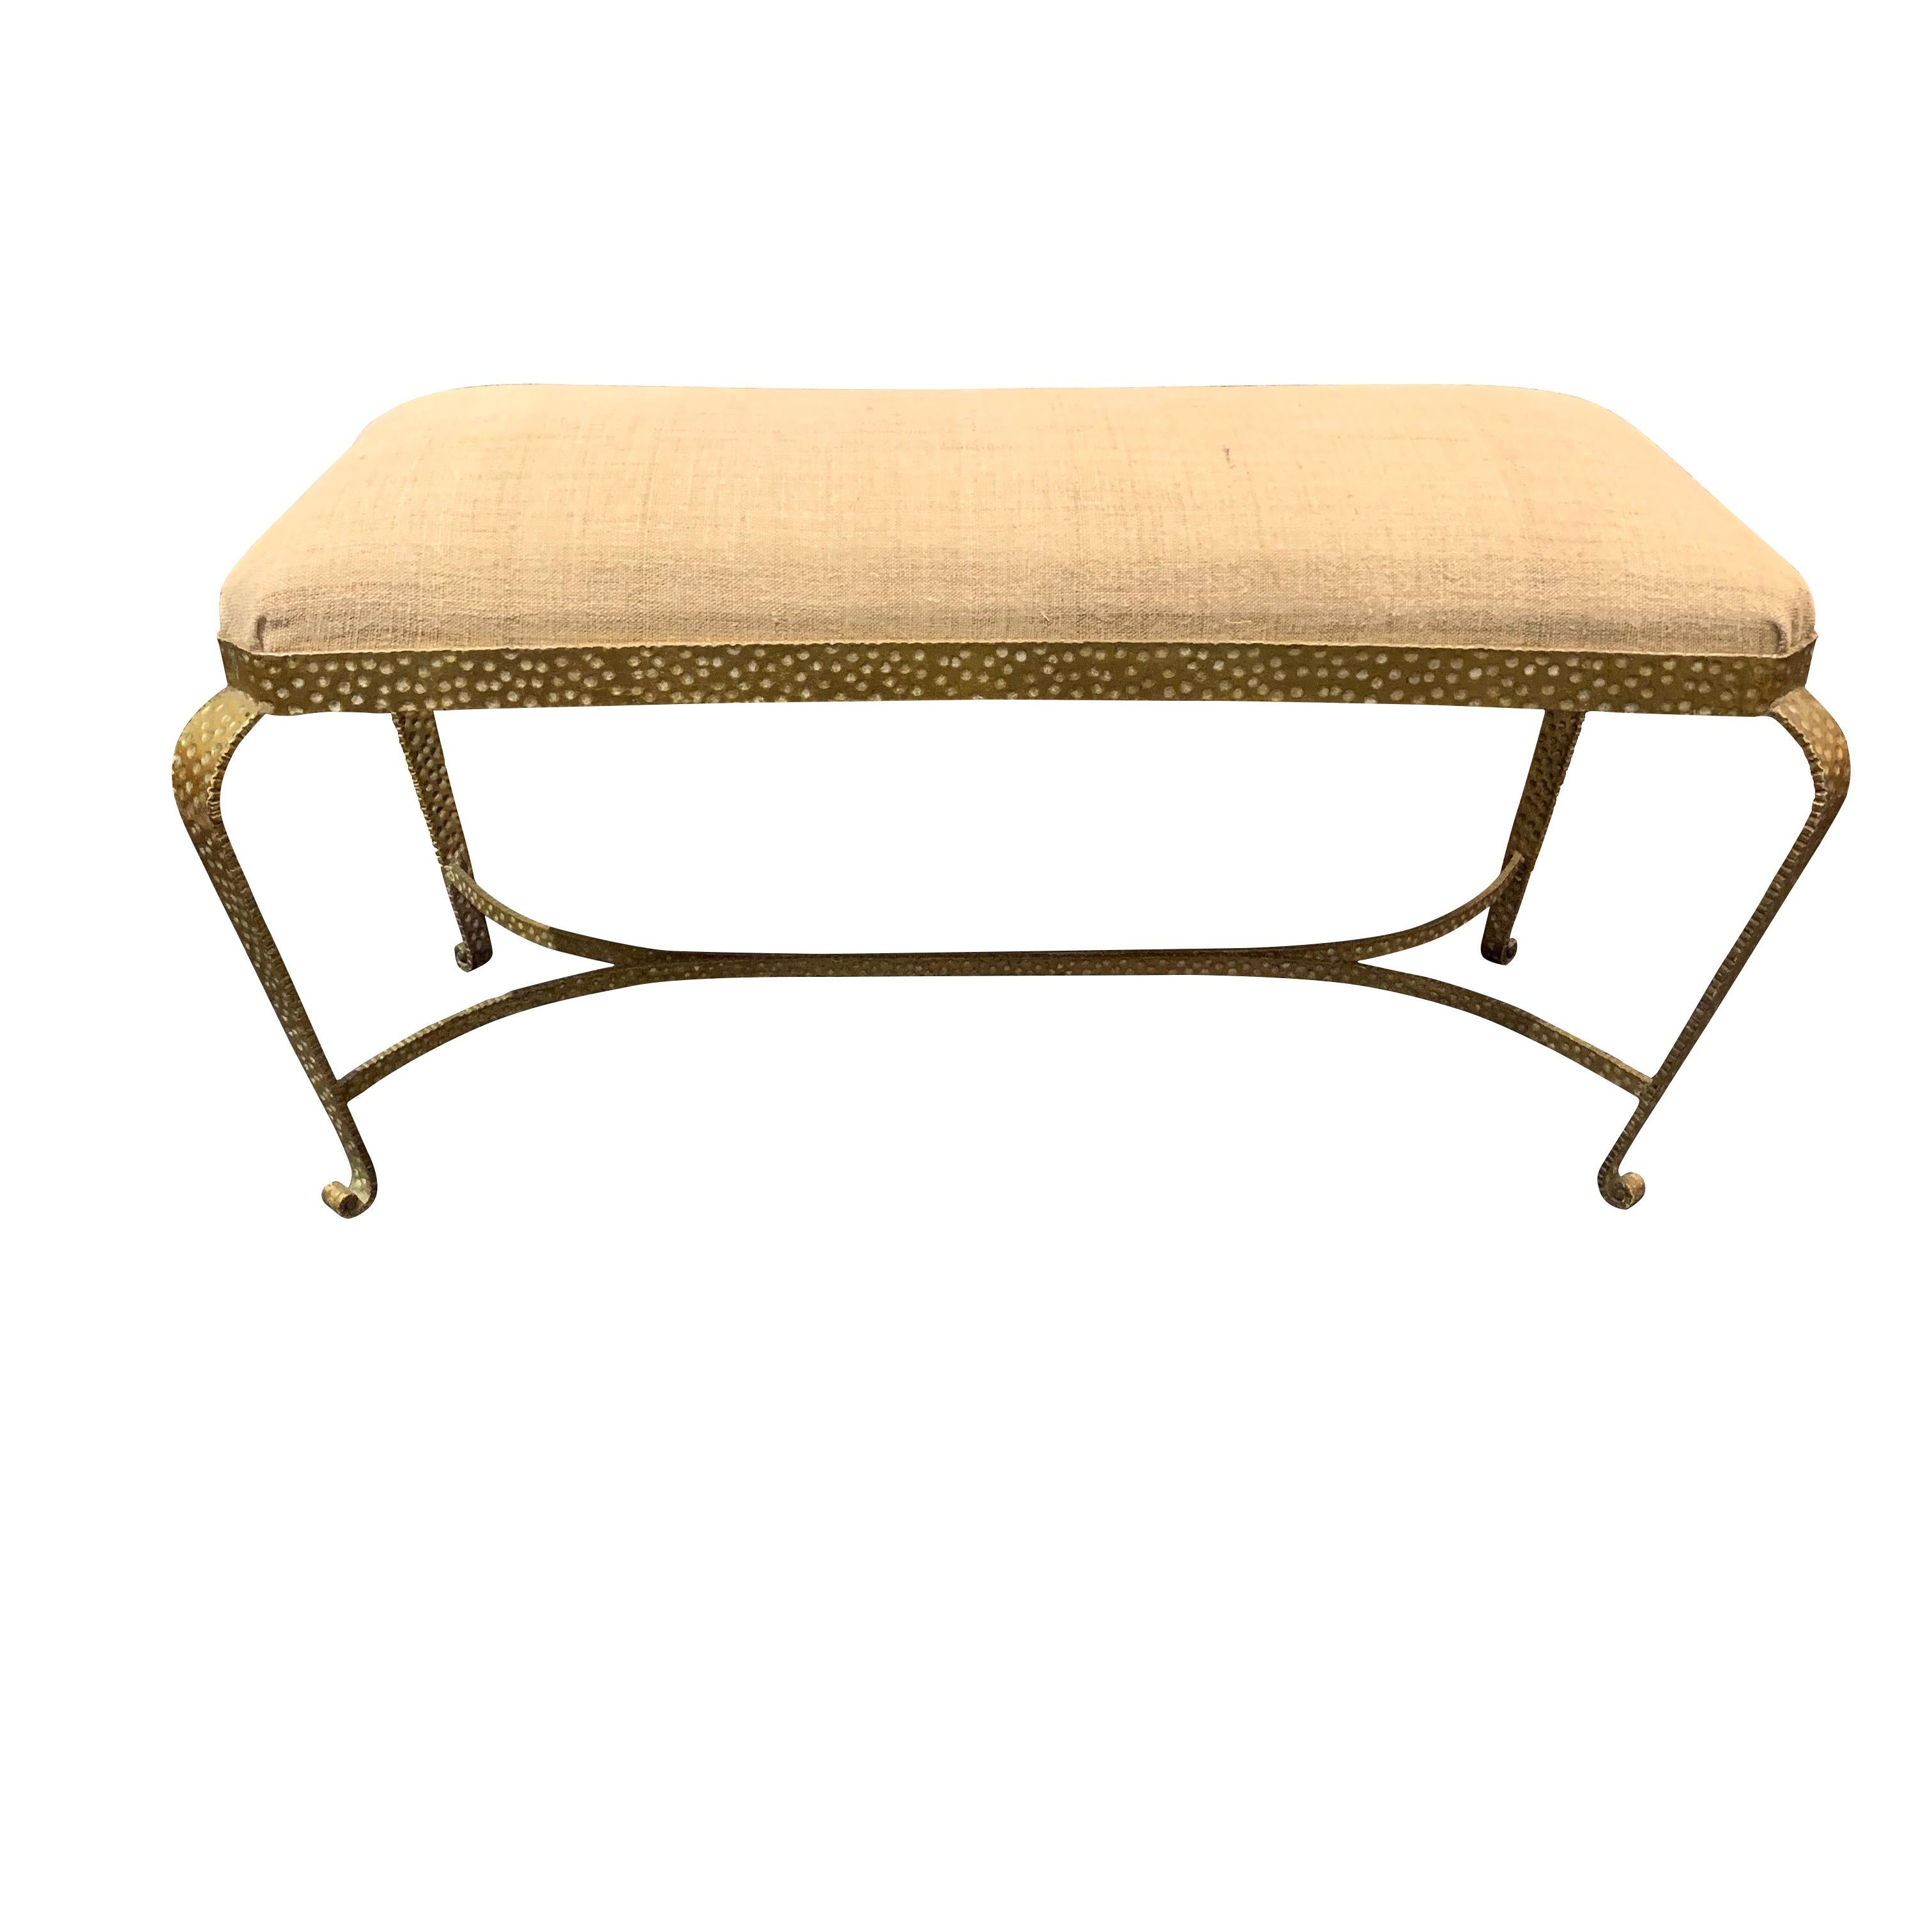 Midcentury Italian bench designed by Pier Luigi Colli
Signature gold wrought iron with dotted motif.
Newly reupholstered in vintage Belgian linen.